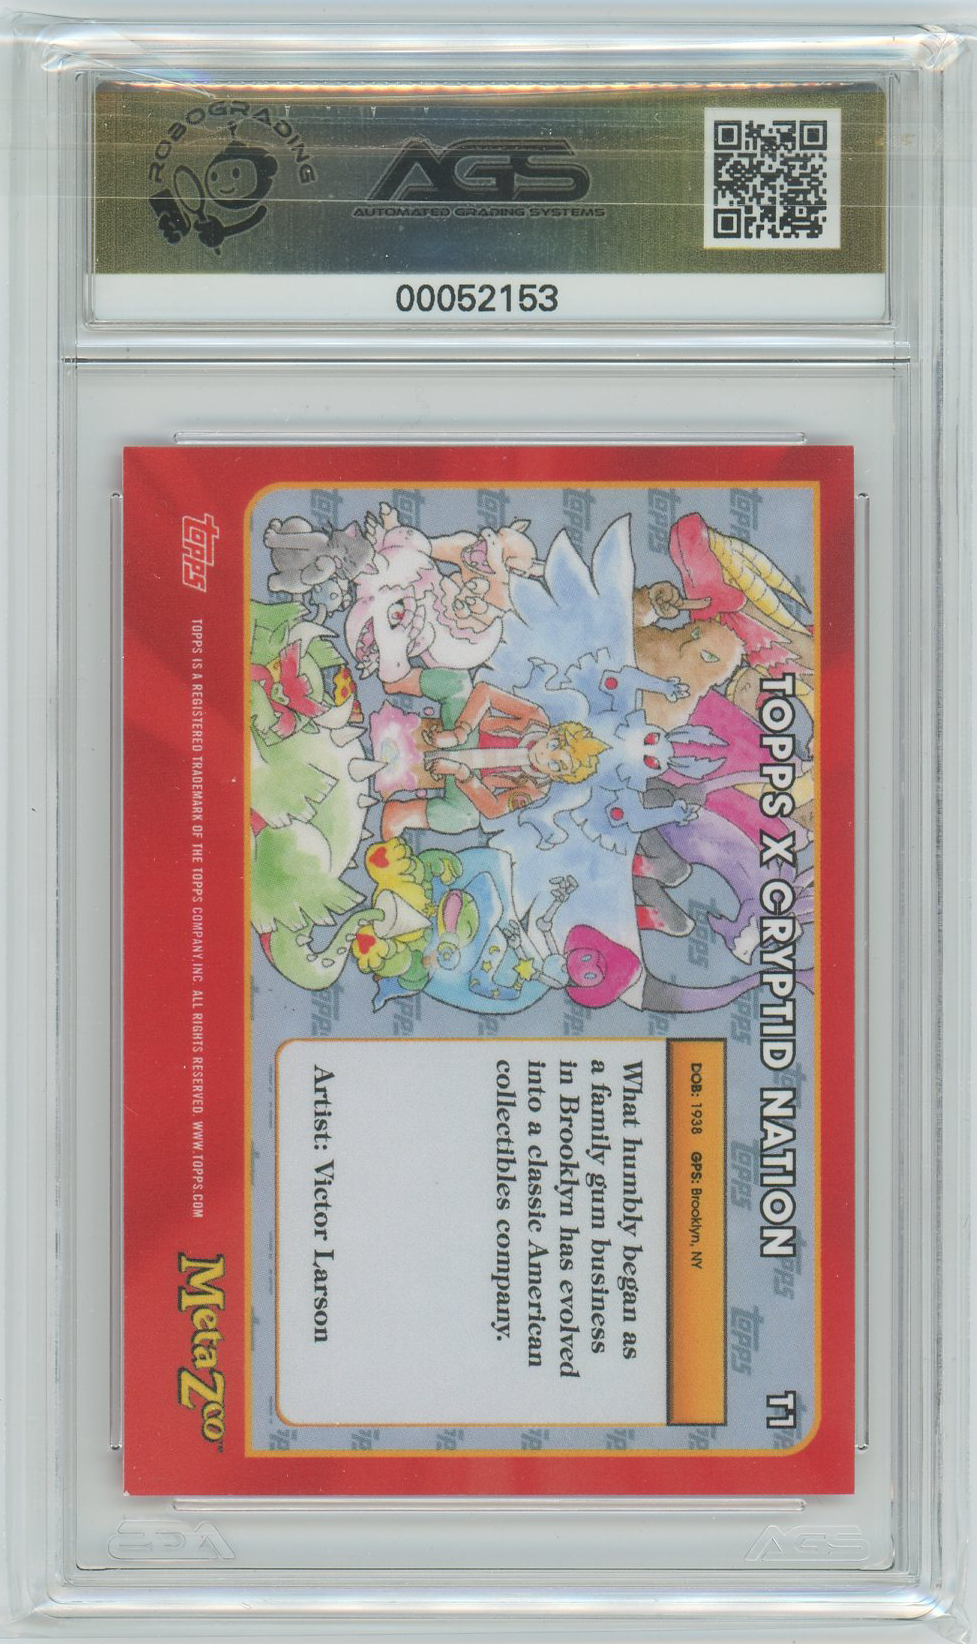 AGS (MINT+ 9.5) Topps x Cryptid Nation Collaboration #T1 - Serialized # 656/999 - 2021 Topps MetaZoo Cryptid Nation (#00052153)